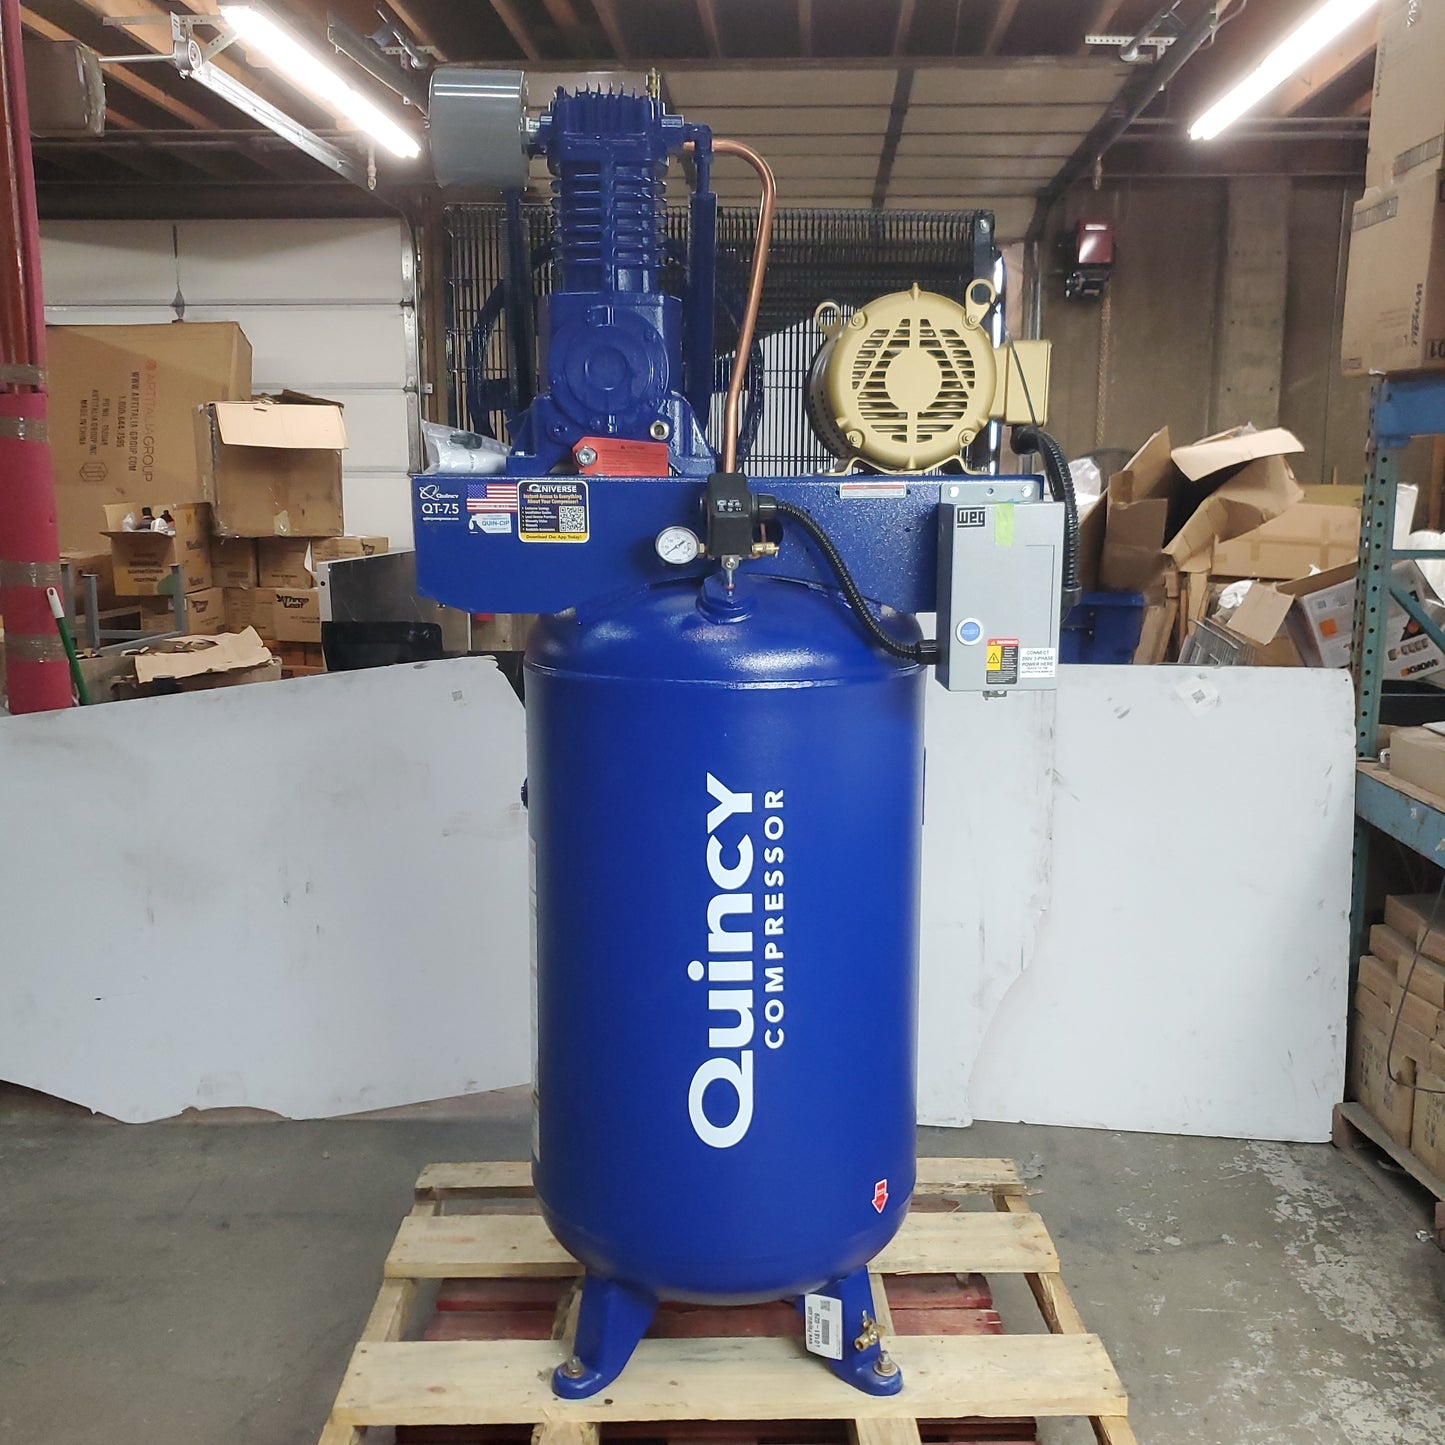 QUINCY QT Pro 7.5 HP 80 Gallon Air Compressor Two-Stage 208V 3Phase 473DS80VCB20